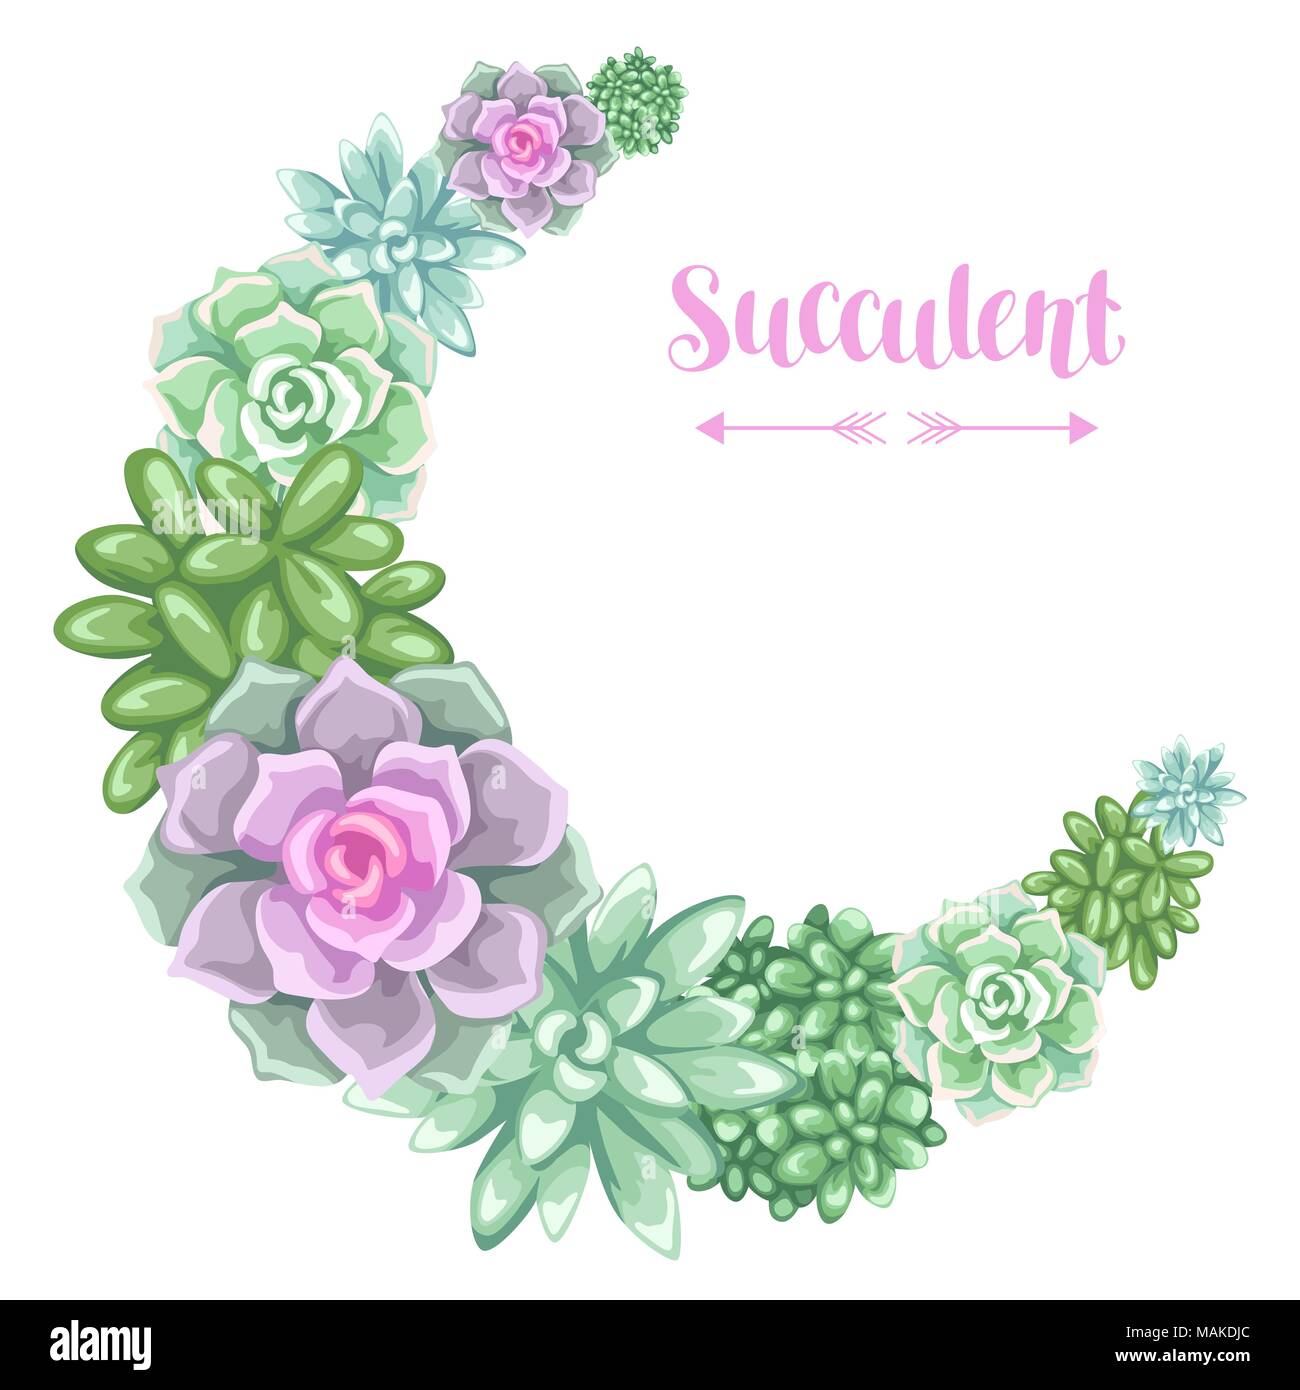 Wreath with succulents. Echeveria, Jade Plant and Donkey Tails Stock Vector